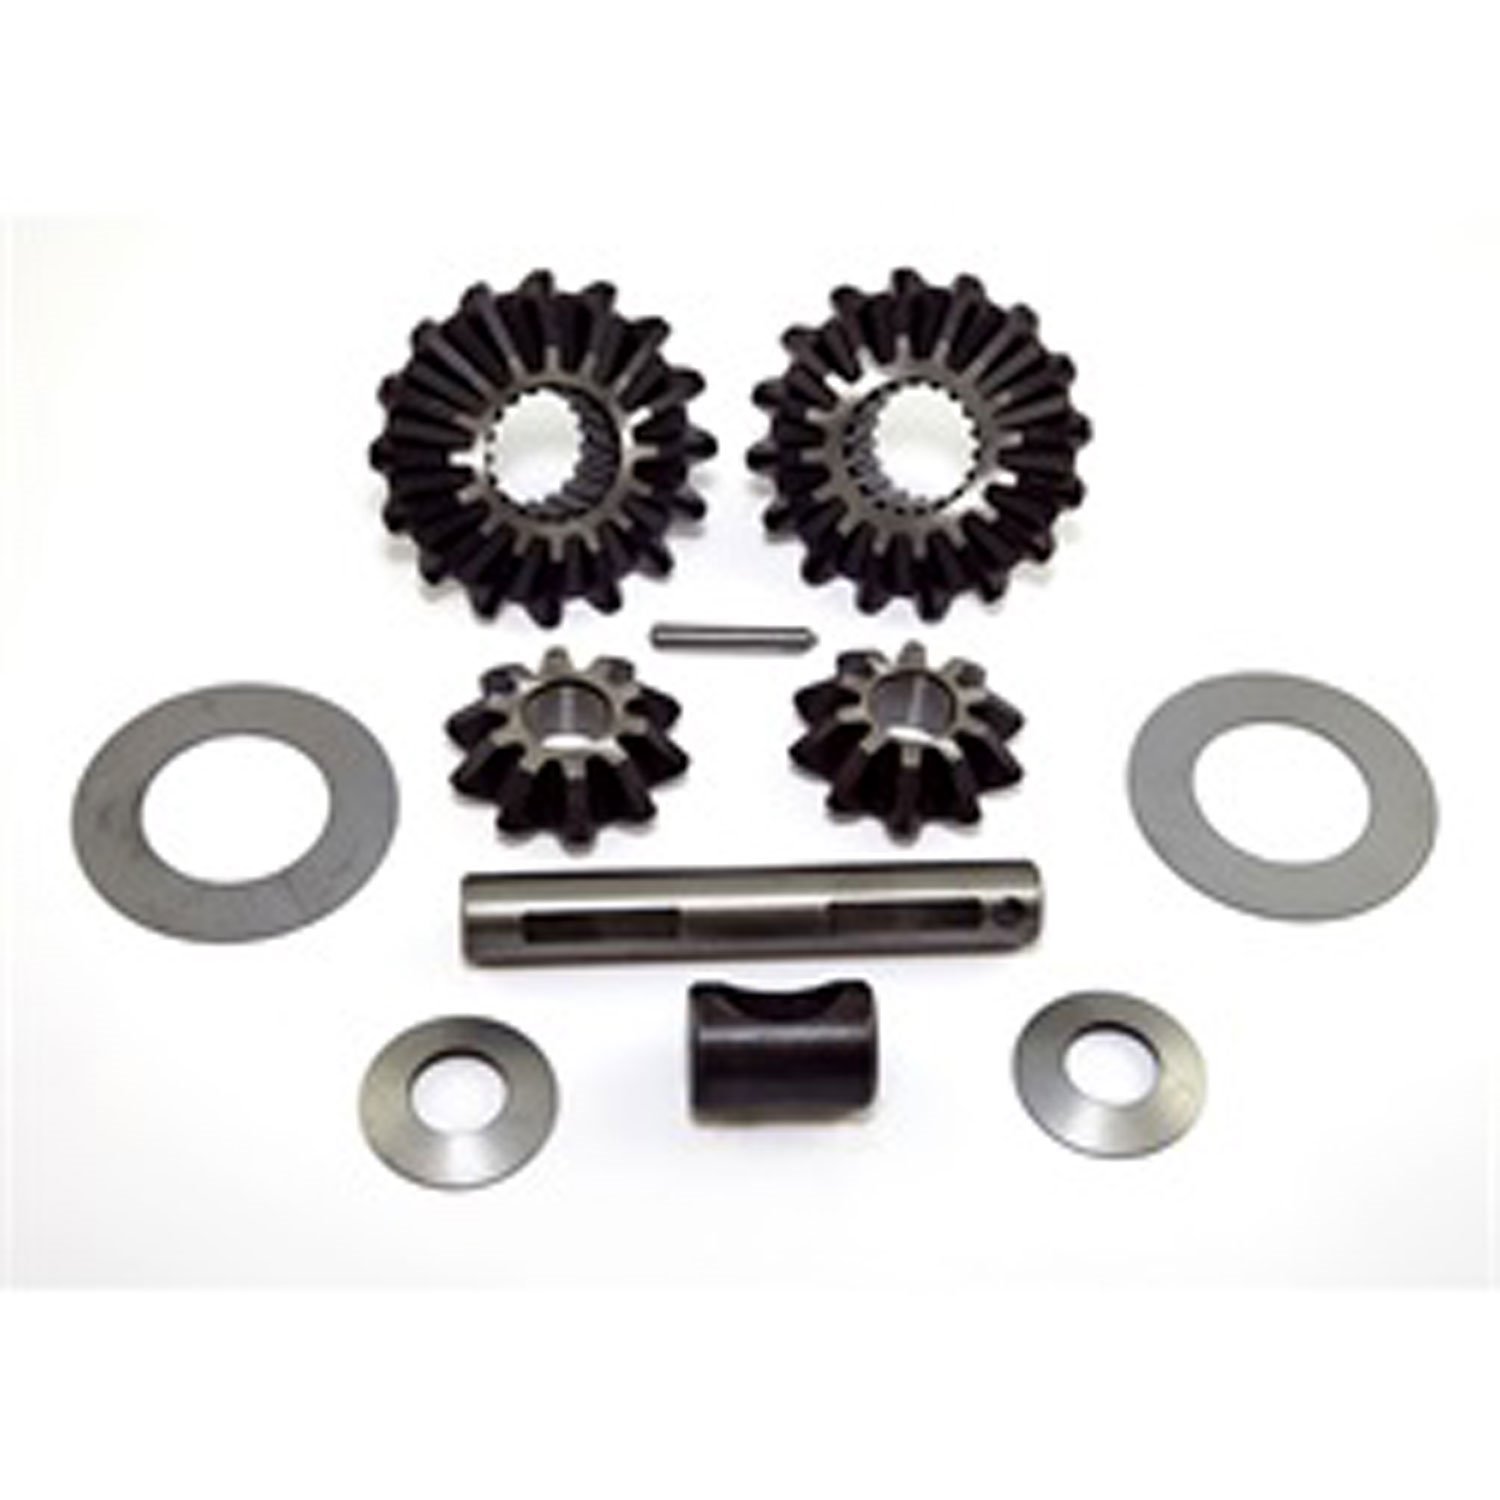 Differential Spider Gear Kit for d44 W/Tapered Axles 19 Spine 1952-1964 Truck 1952-1964 Station Wago